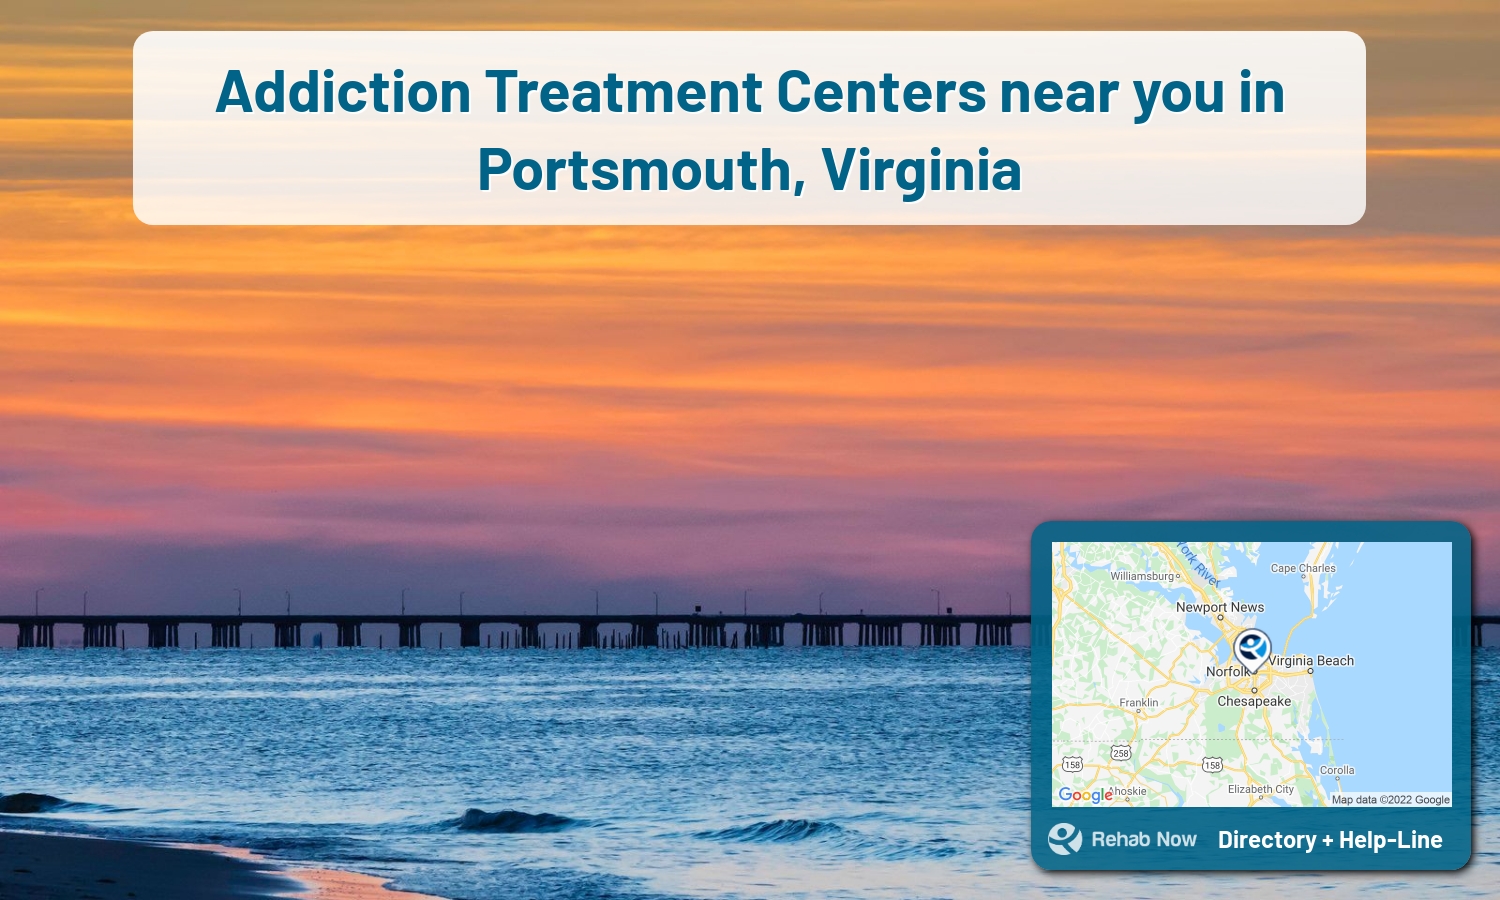 Our experts can help you find treatment now in Portsmouth, Virginia. We list drug rehab and alcohol centers in Virginia.